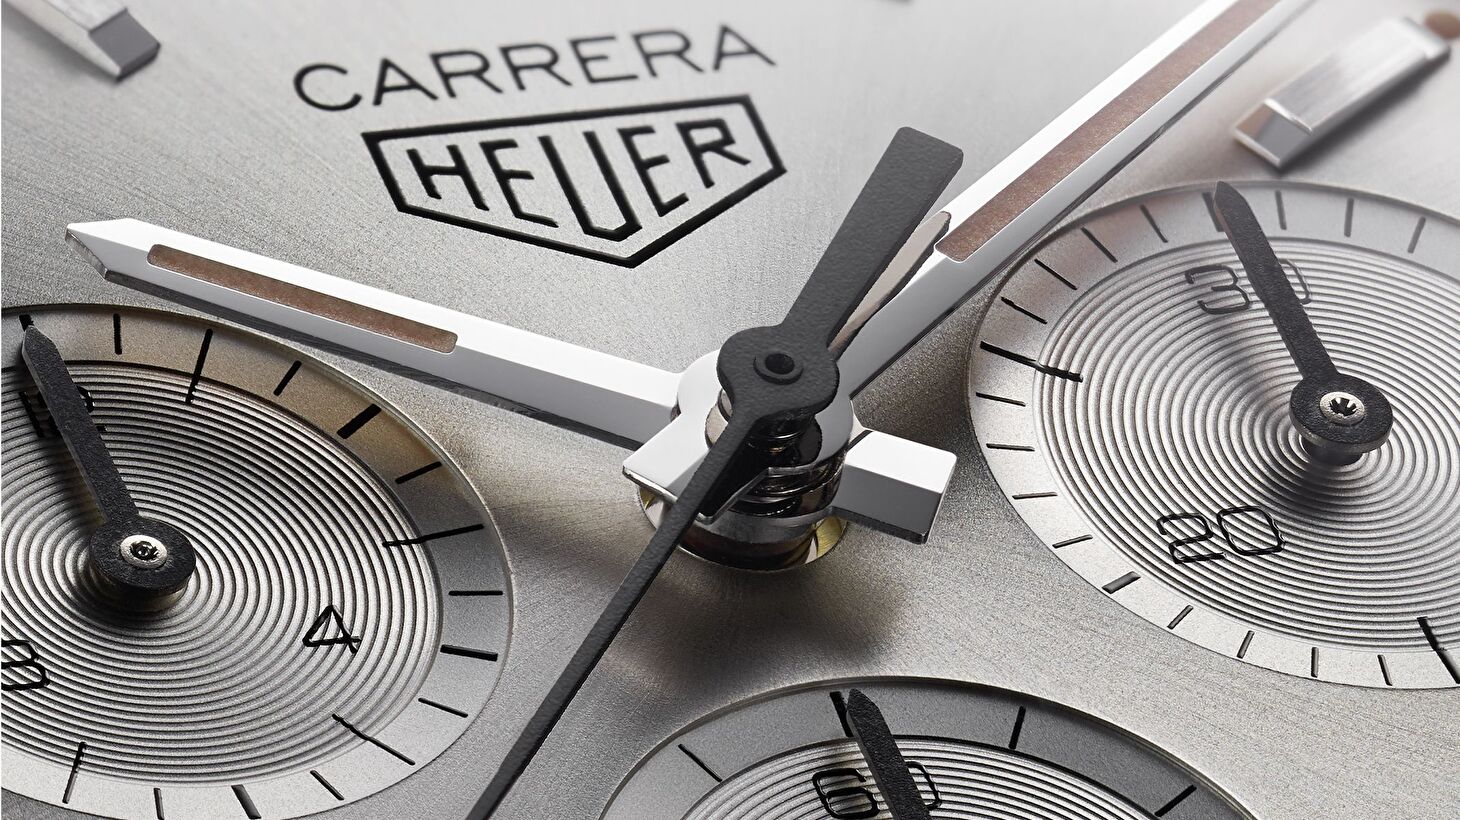 TAG Heuer Carrera 160 Years Silver Limited Edition